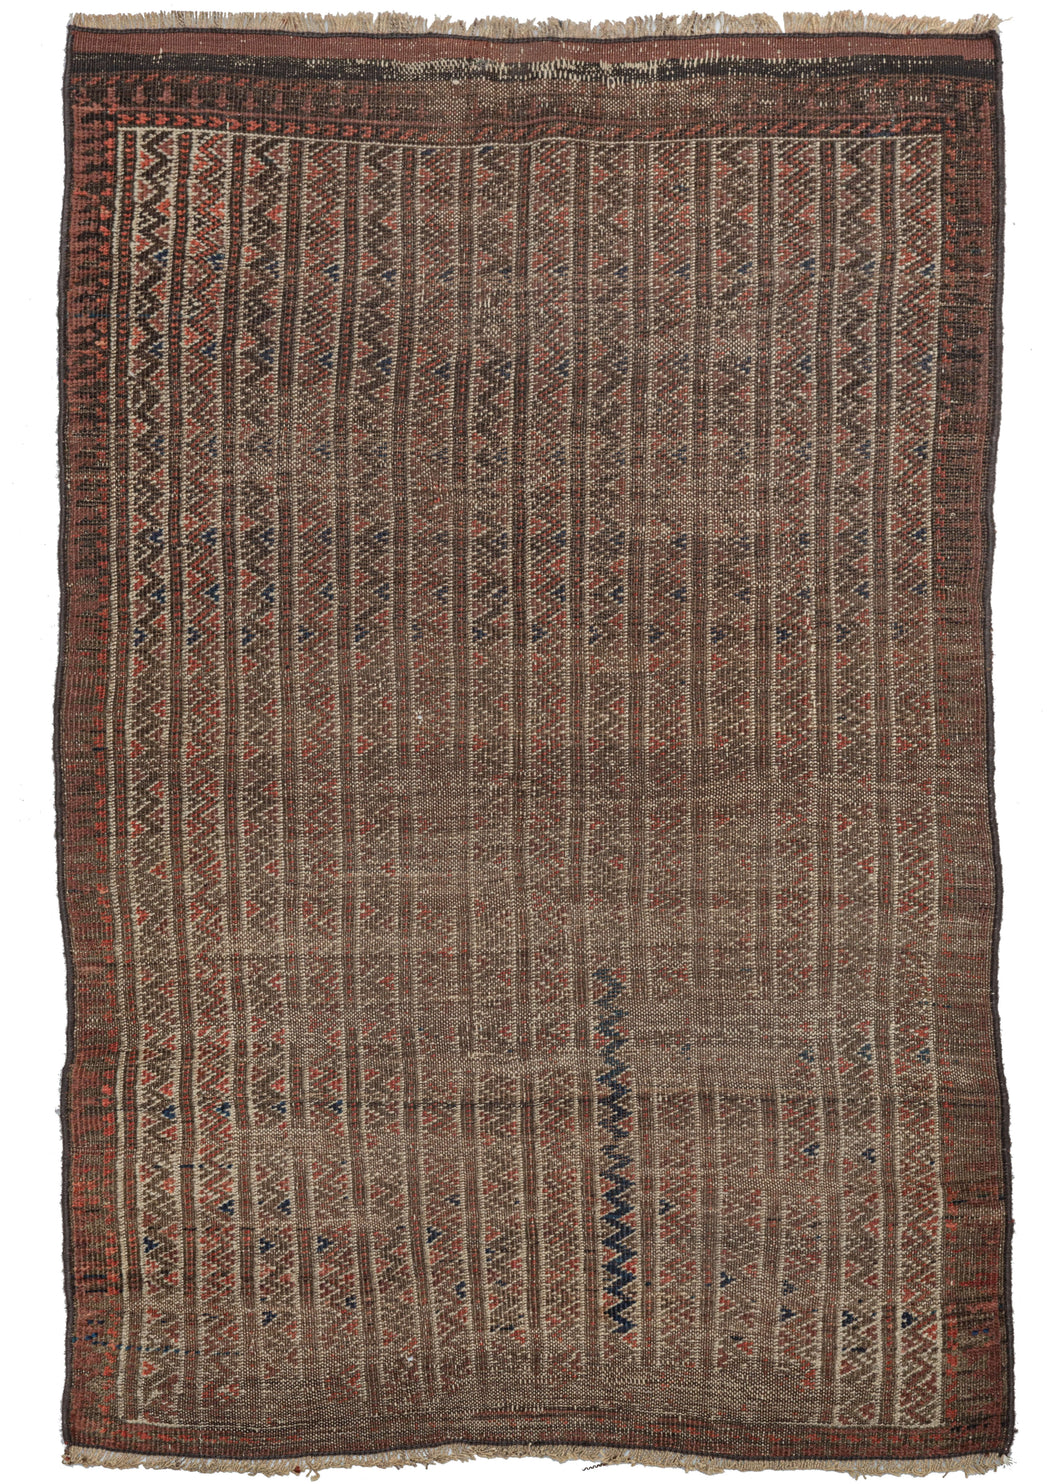 19th century Baluch scatter rug woven in a simple and straightforward palette of deep reddish-brown, navy, oxidized brown, and ivory. It is composed of multiple columns featuring energetic zig zags. One navy zig zag near the center is thicker and more prominent giving the piece interest and pizzaz. 